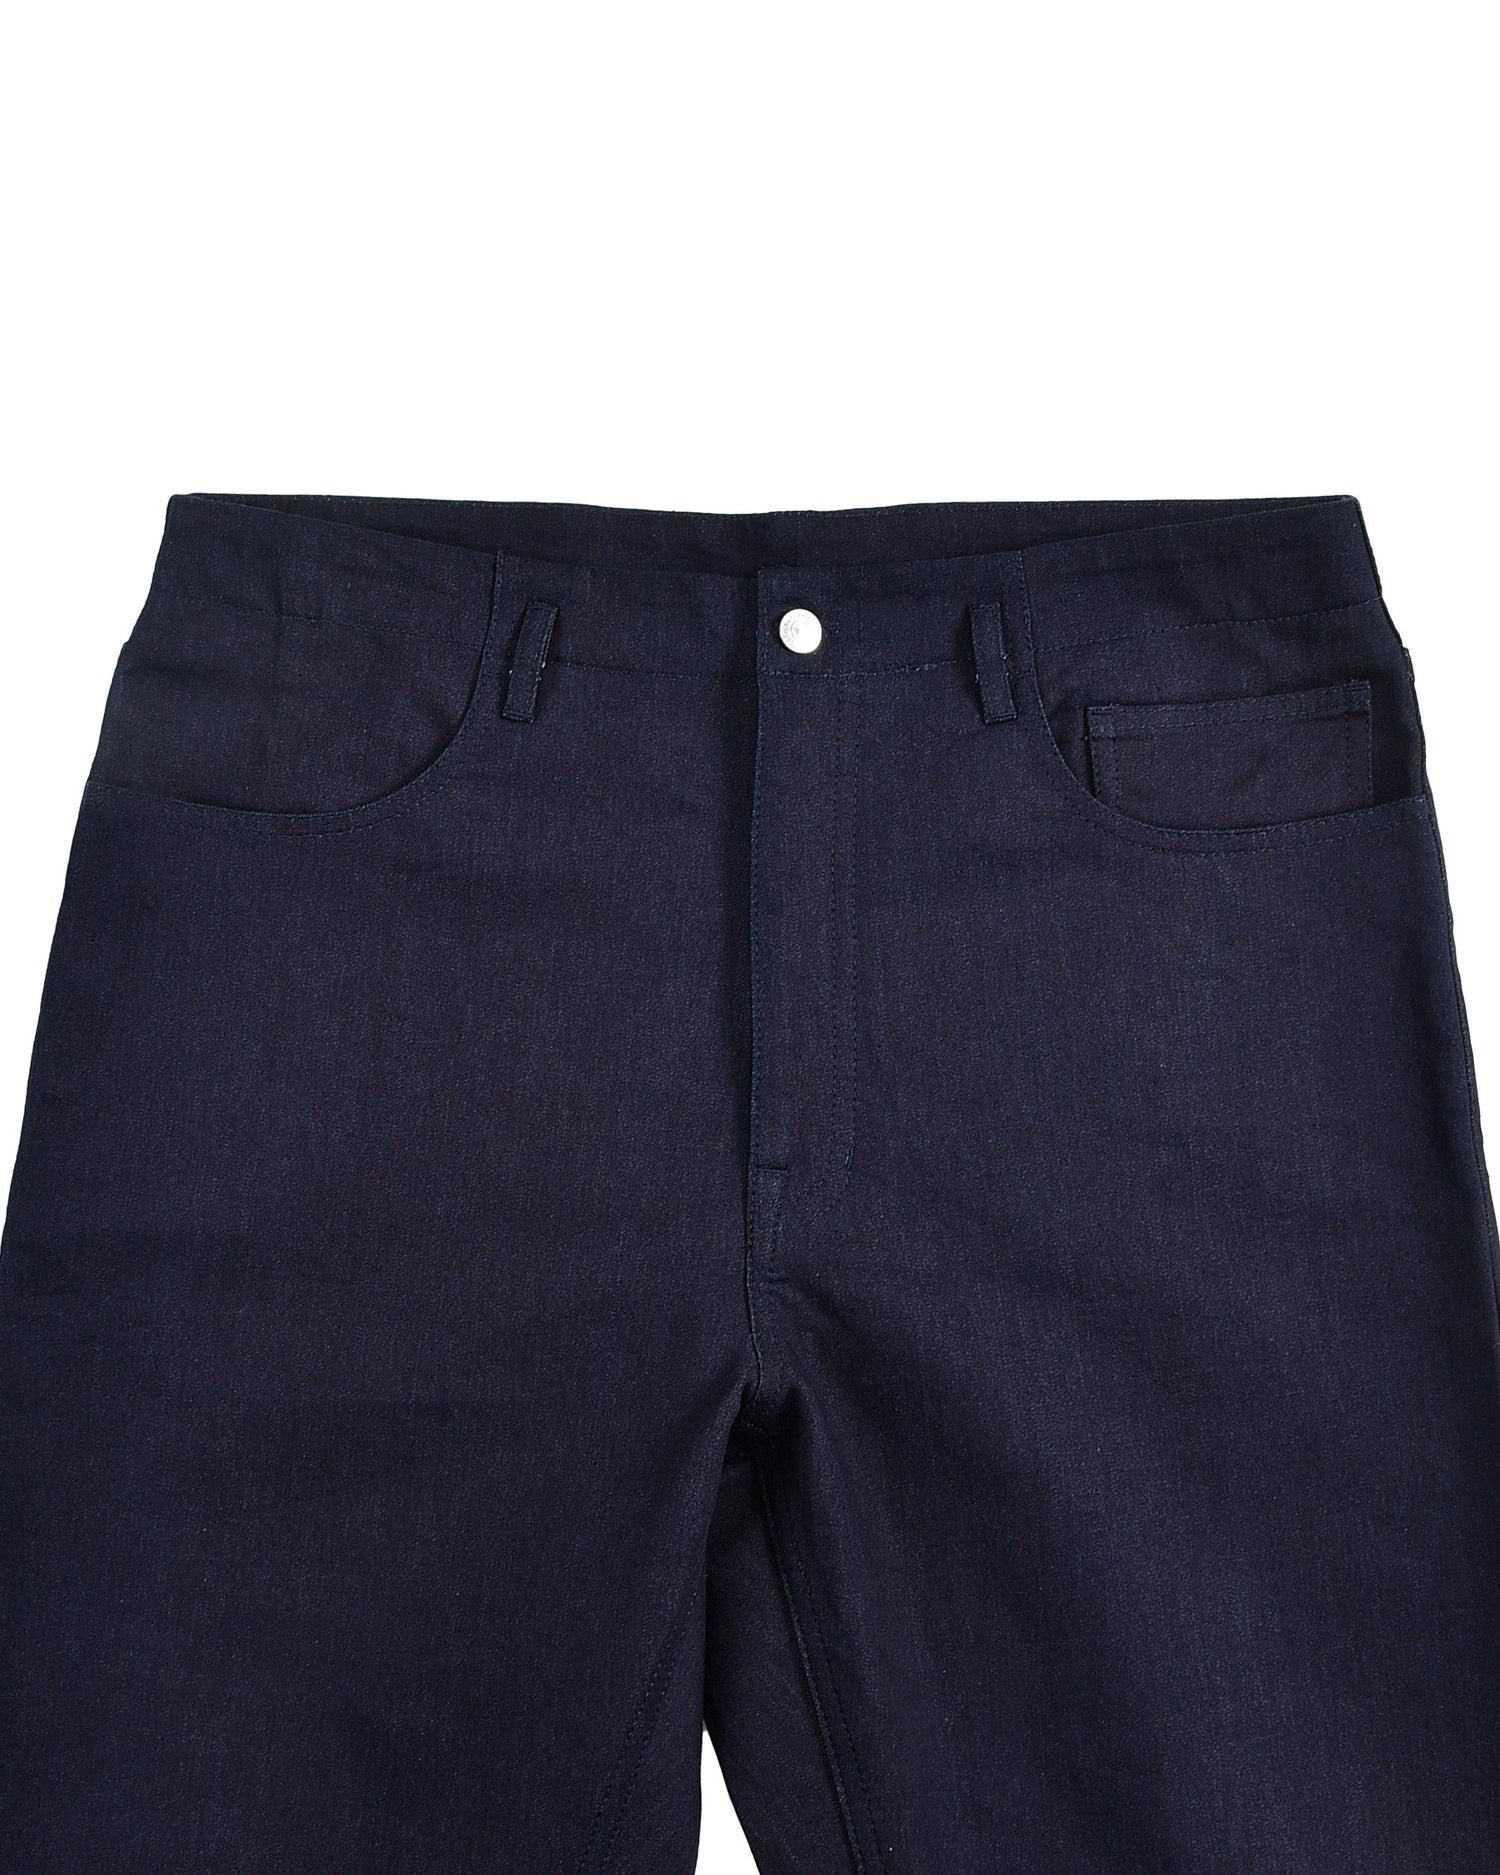 Front view of stretchable jeans for men by Luxire in dark navy